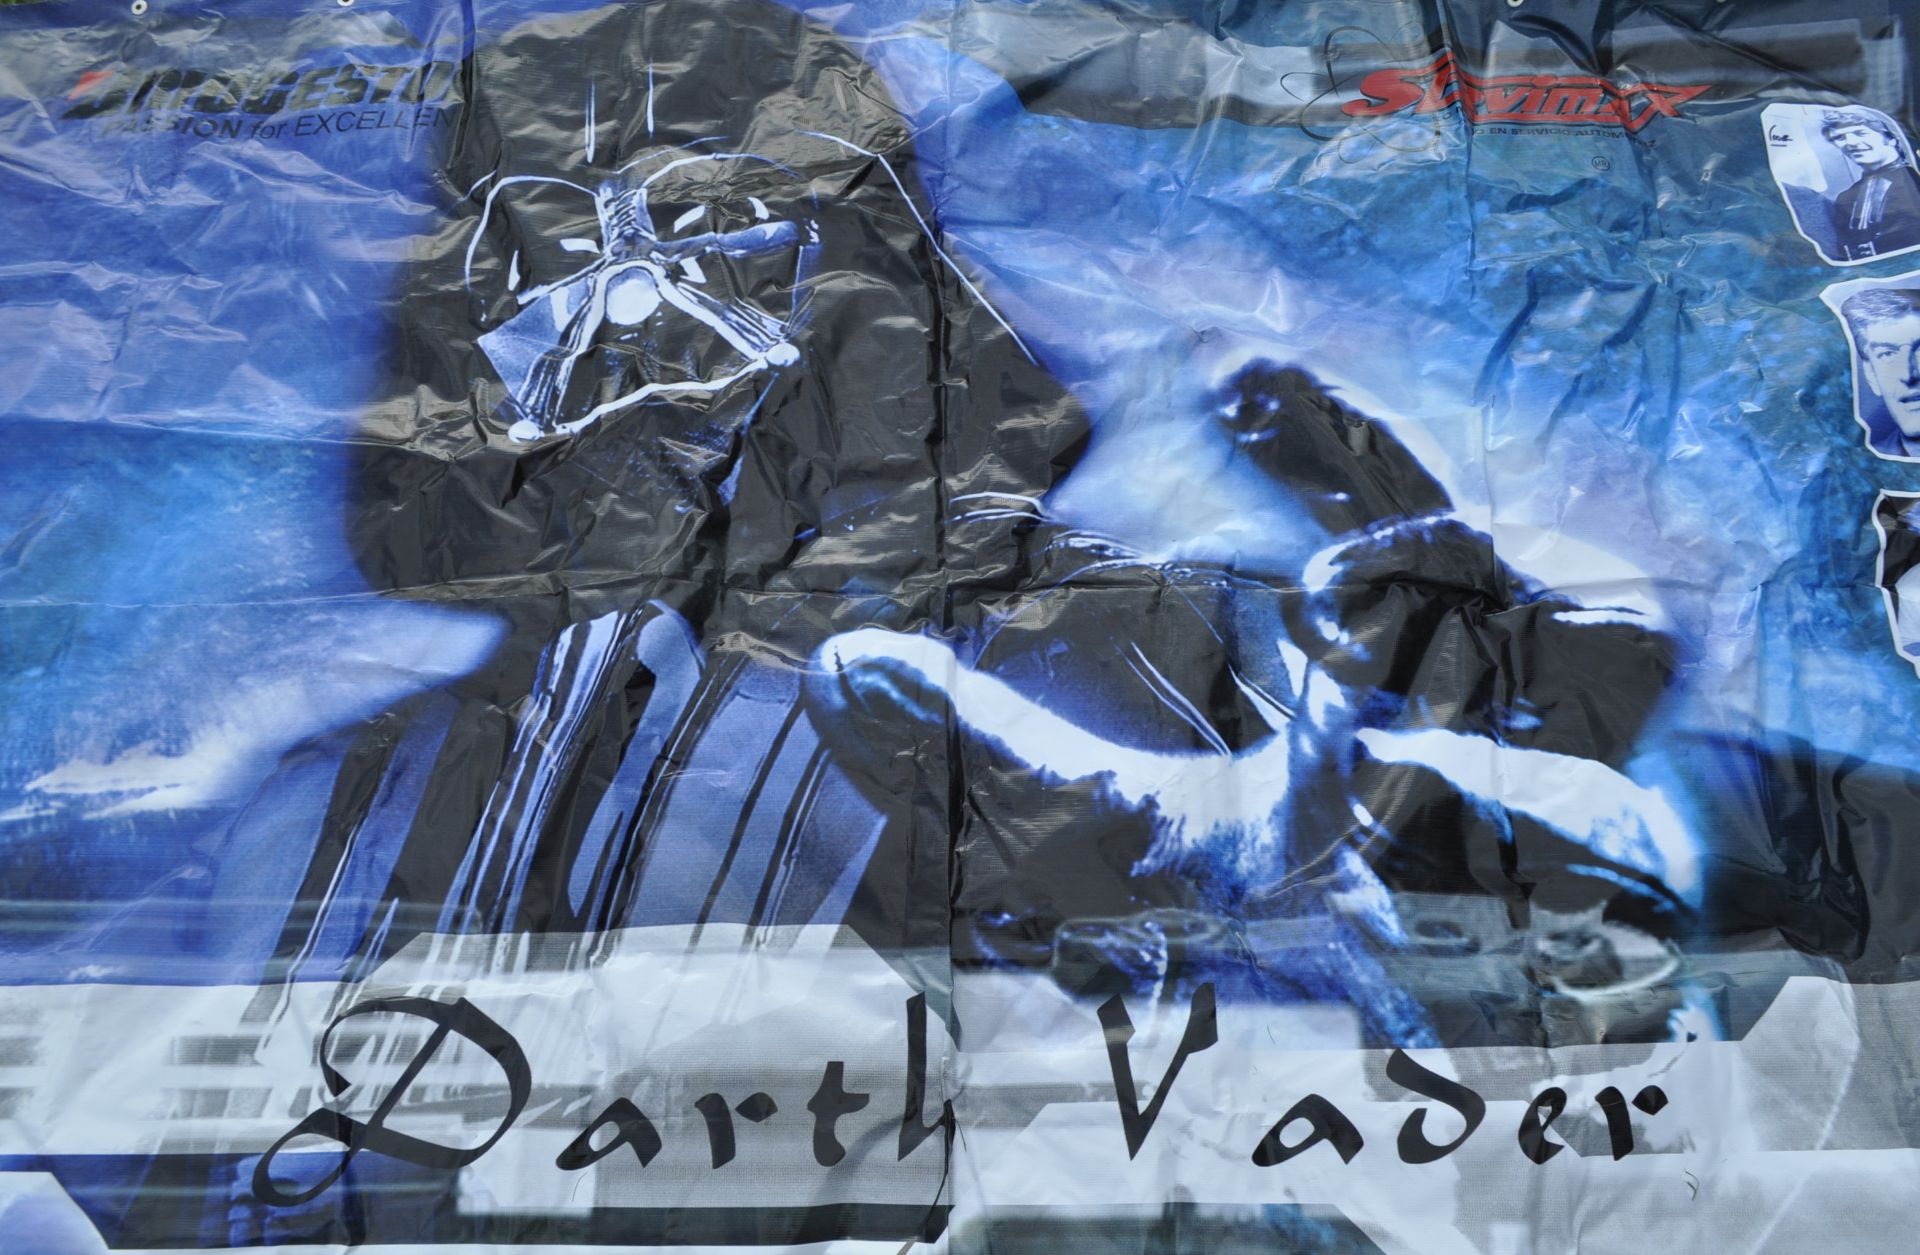 ESTATE OF DAVE PROWSE - LARGE 10FT X 6FT BANNER - Image 2 of 3